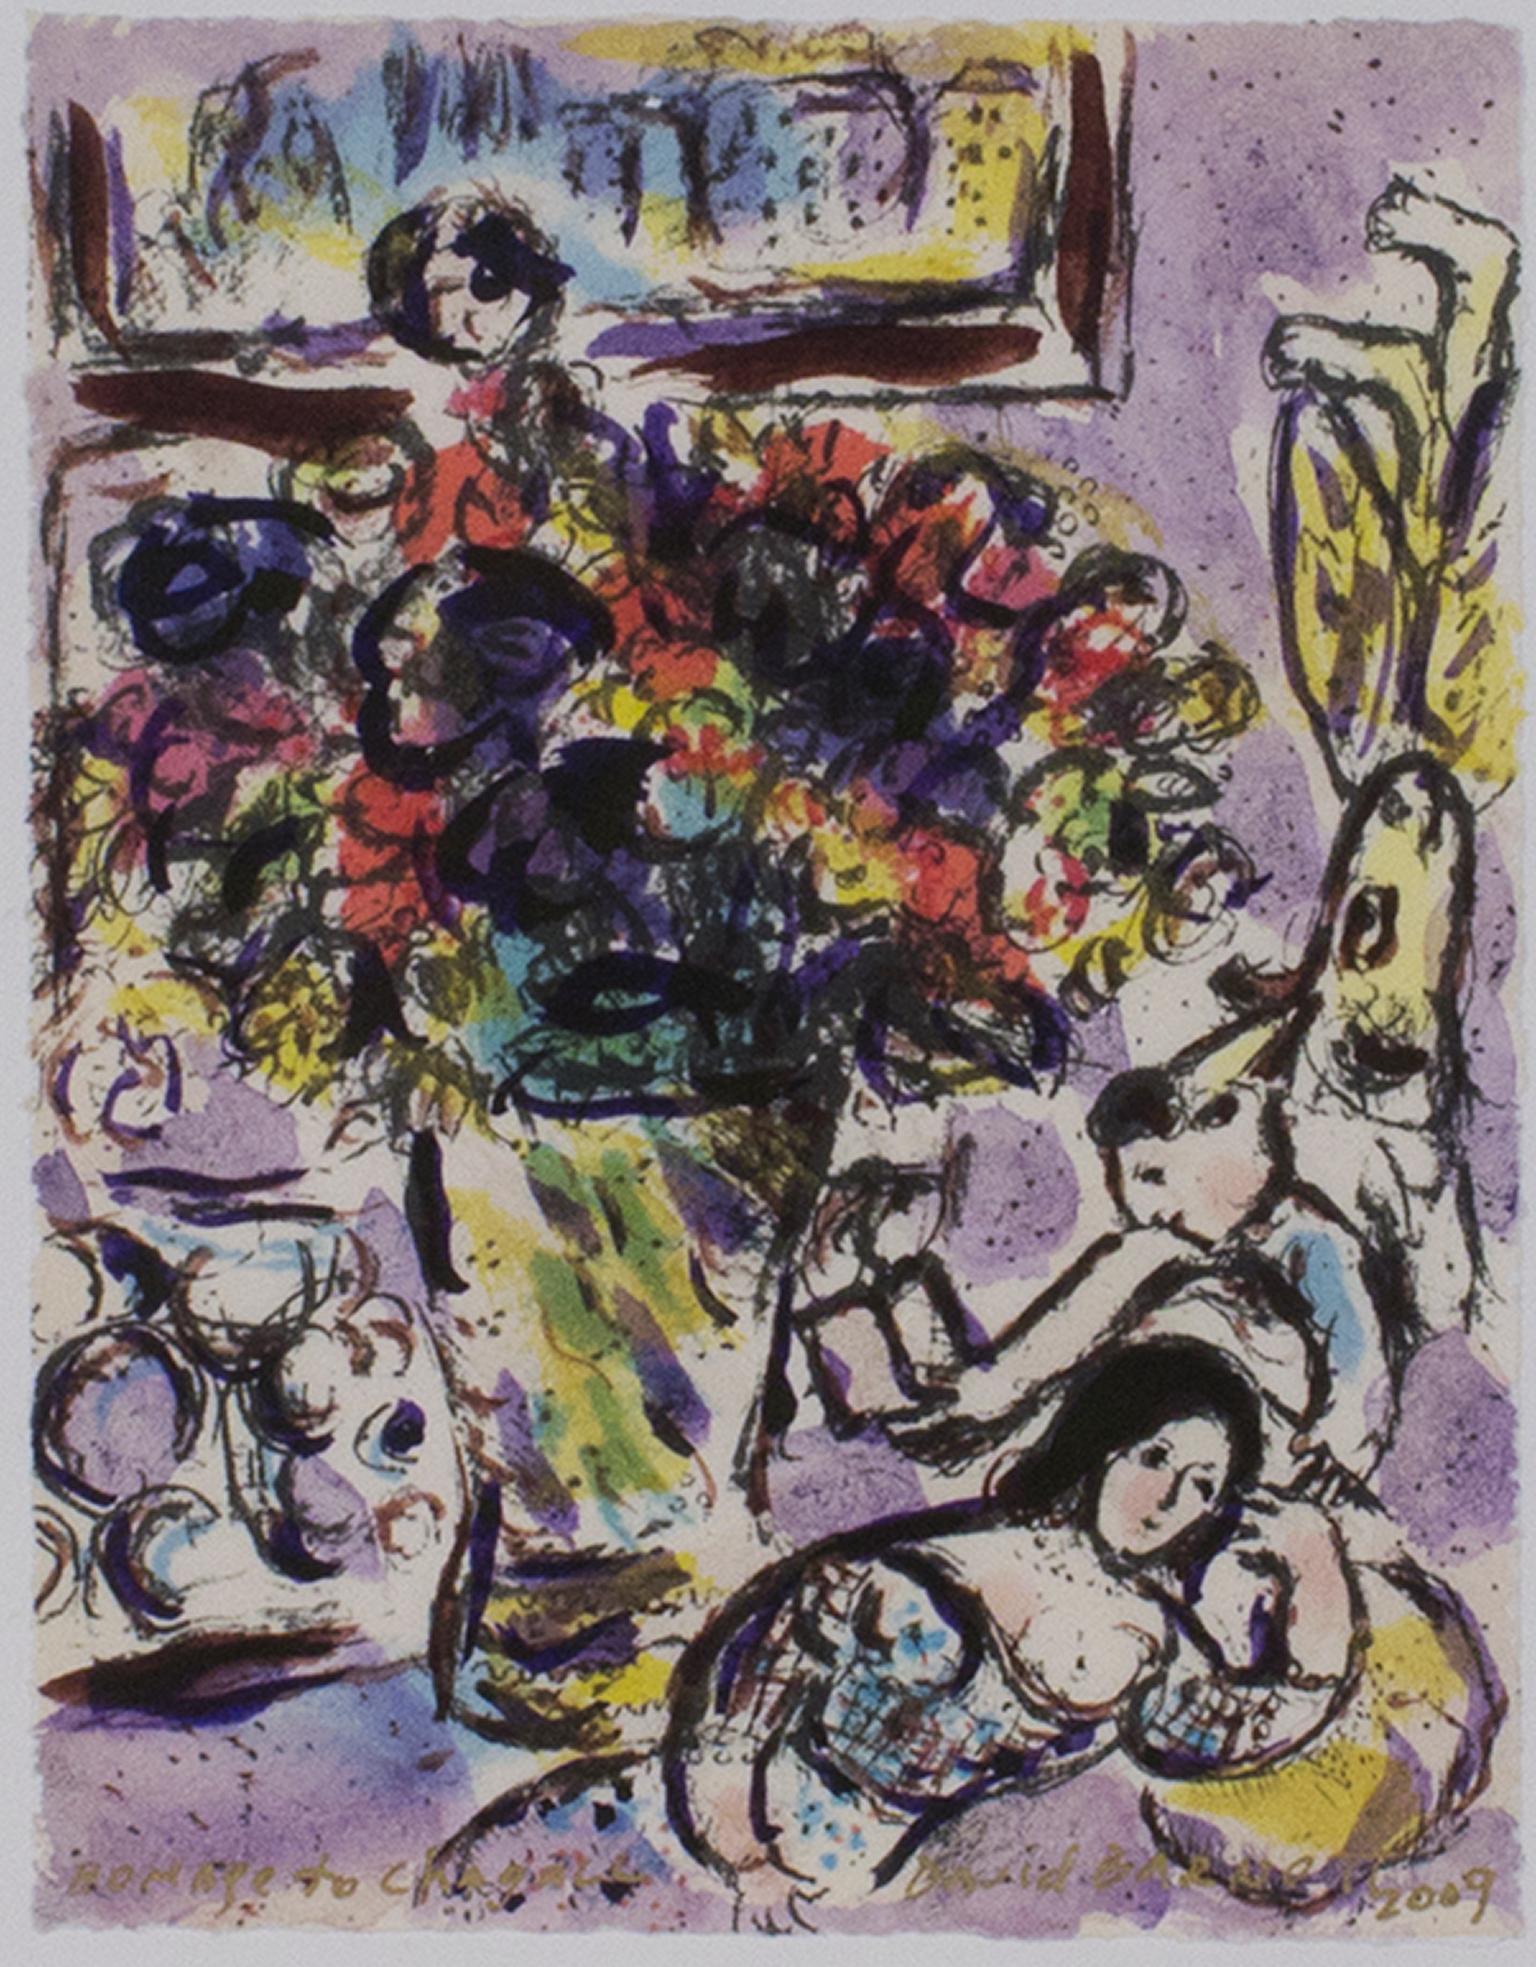 "Homage to Marc Chagall: The Anemones, M730" is an original mixed media piece by David Barnett, signed and dated in the lower right. A large vase of flowers dominates the image from the foreground, a colorful bouquet of red, blue, and yellow. In the